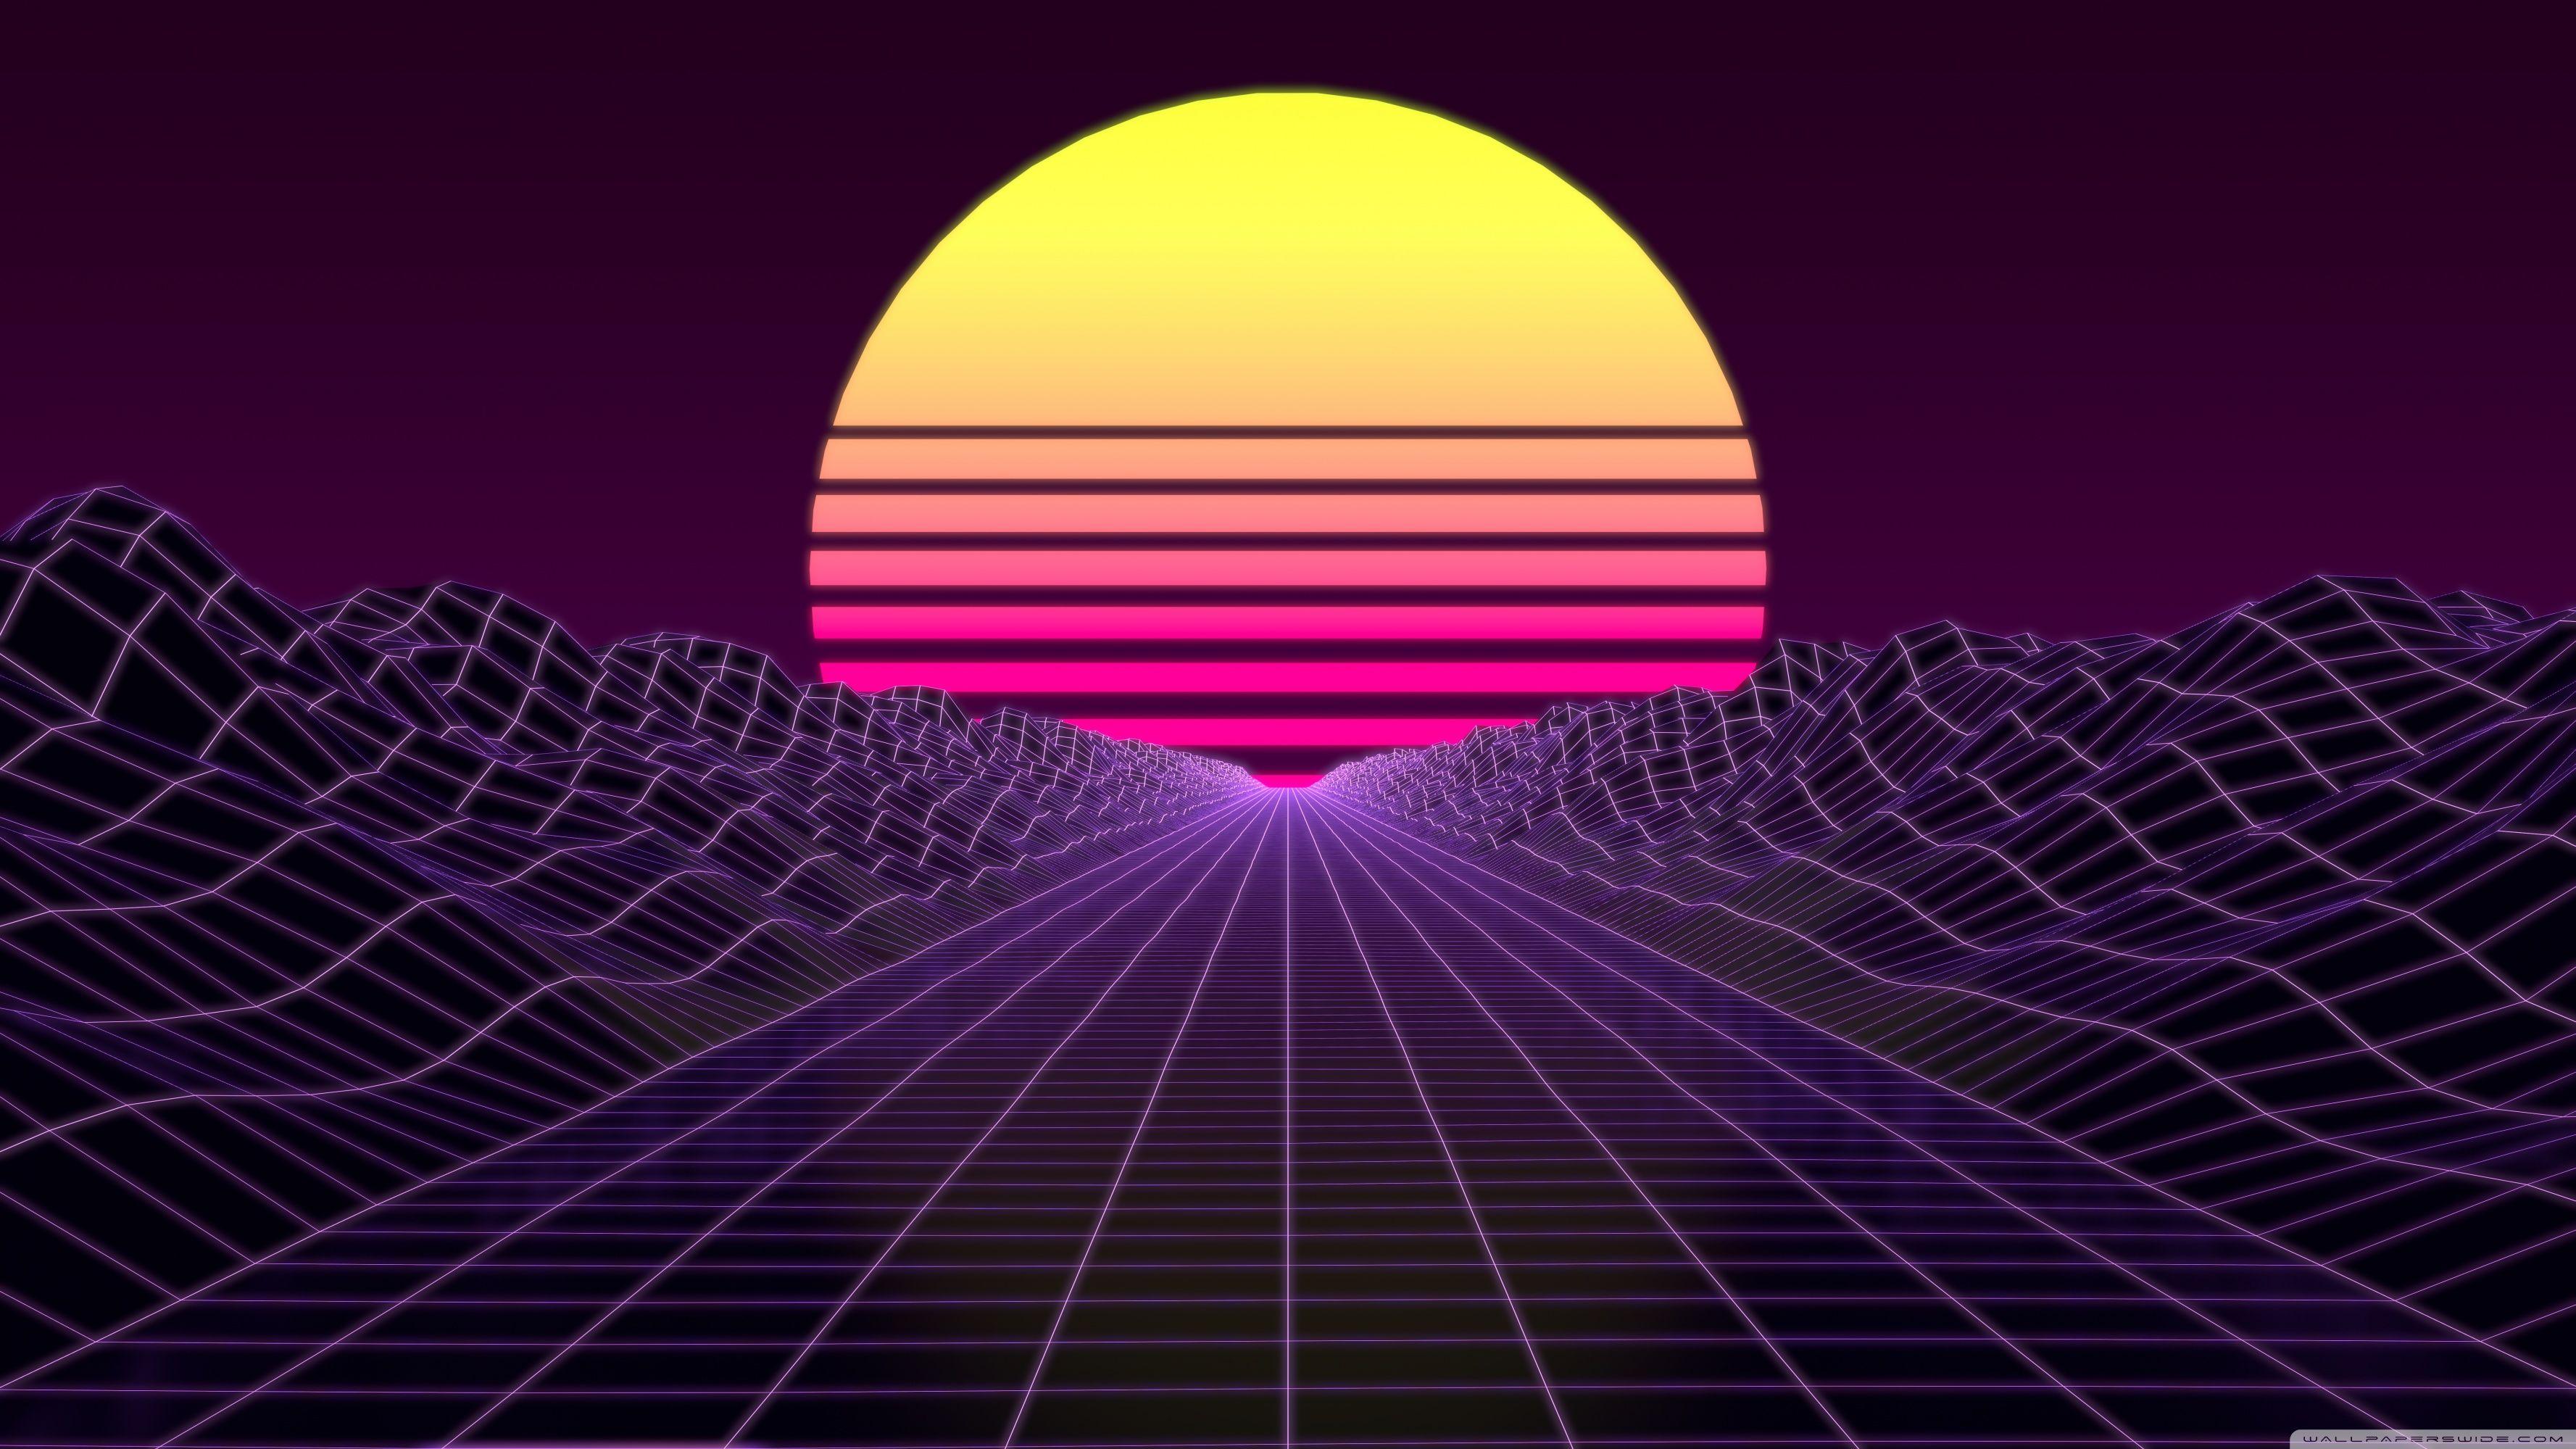 3554 x 1999 · jpeg - Synthwave City Wallpapers - Top Free Synthwave City Backgrounds ...